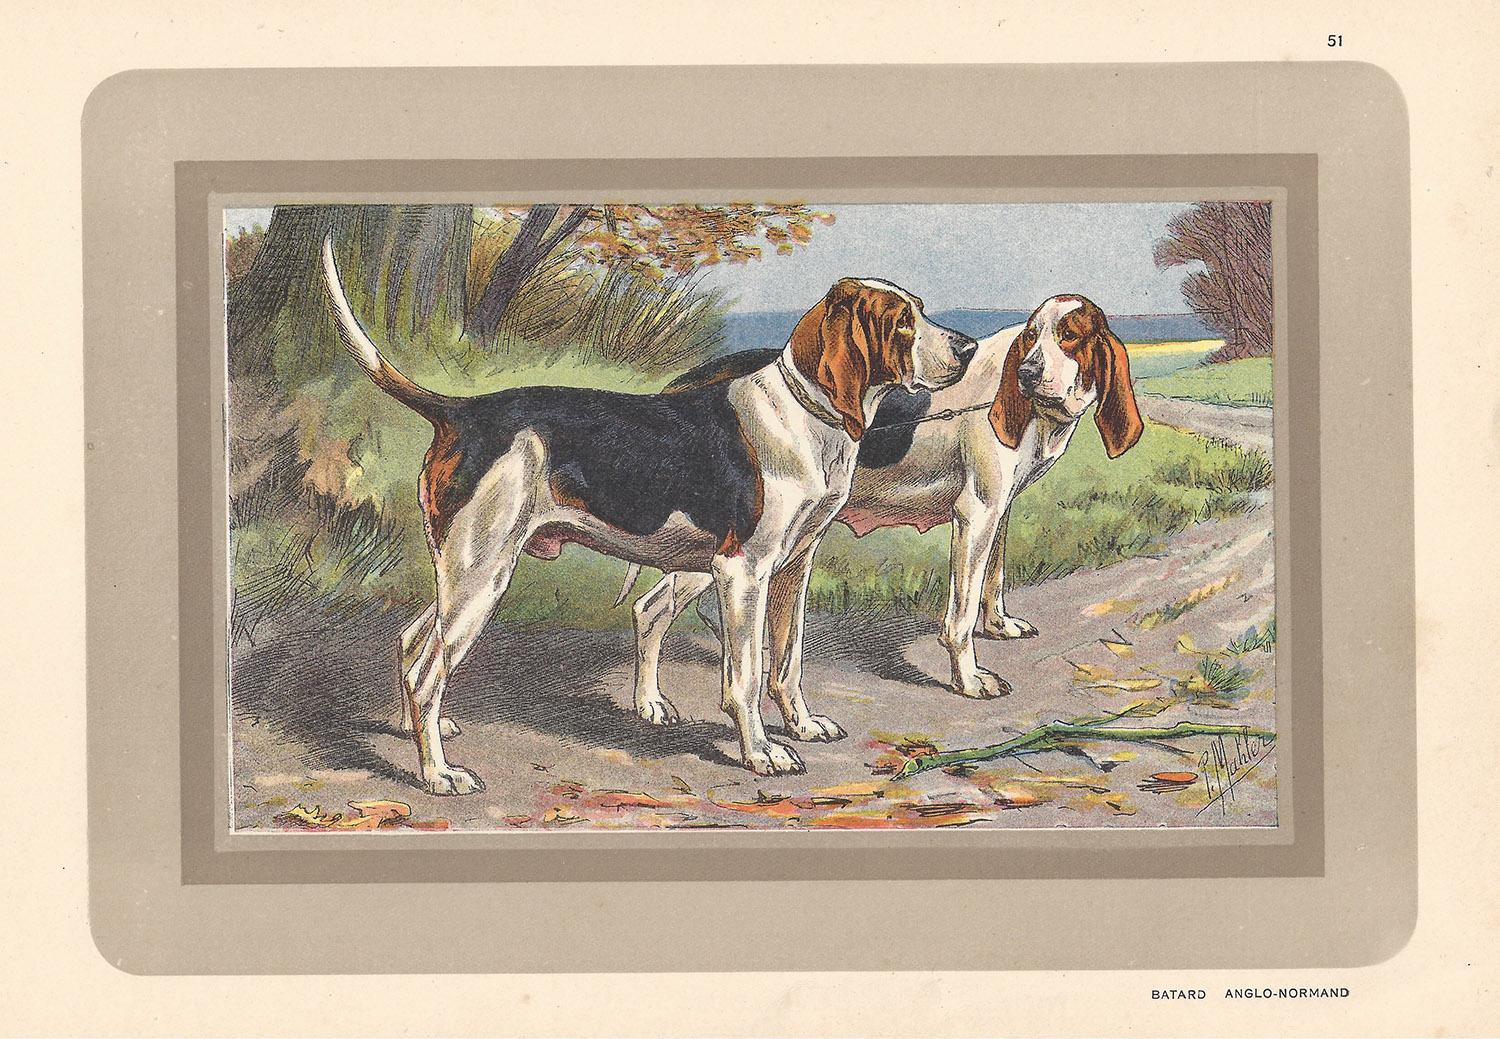 Batard Anglo-Normand, French hound, dog chromolithograph, 1930s